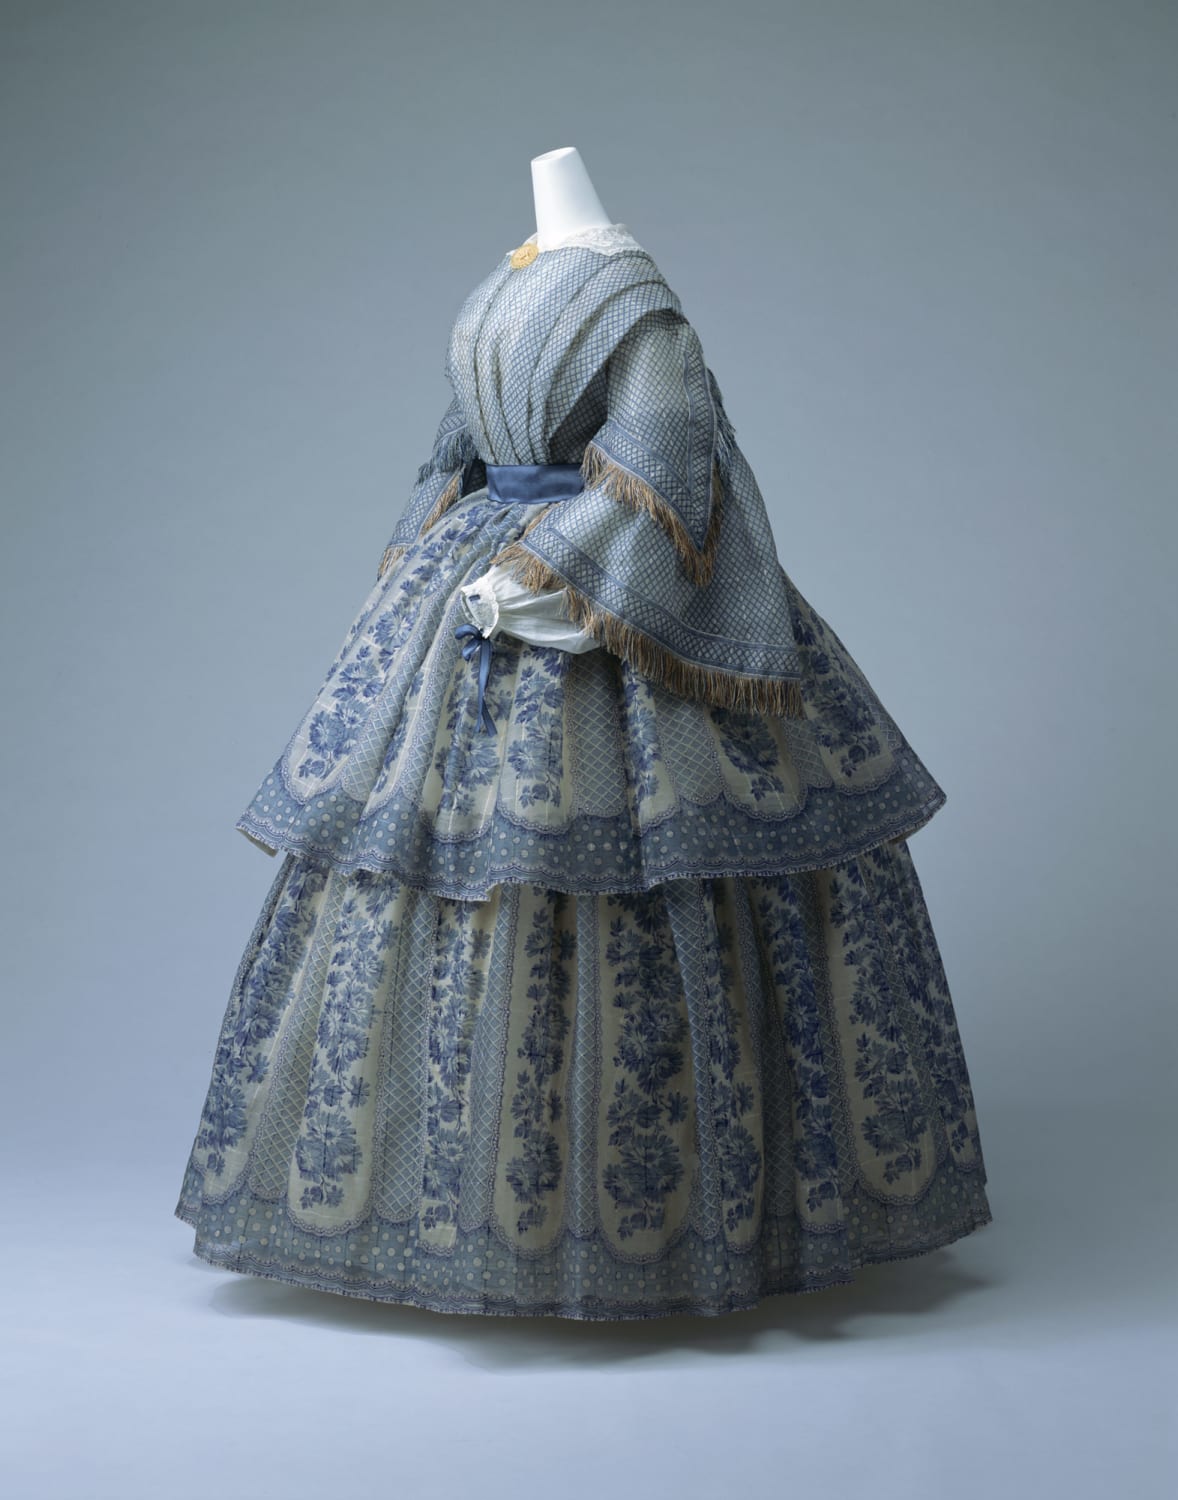 This 1855 day dress proves to be very fashionable for the time with various decorative elements such a fringe and bold patterns, reflecting the rise of voluminous garments and heavy embellishments that became so popular. Read more!